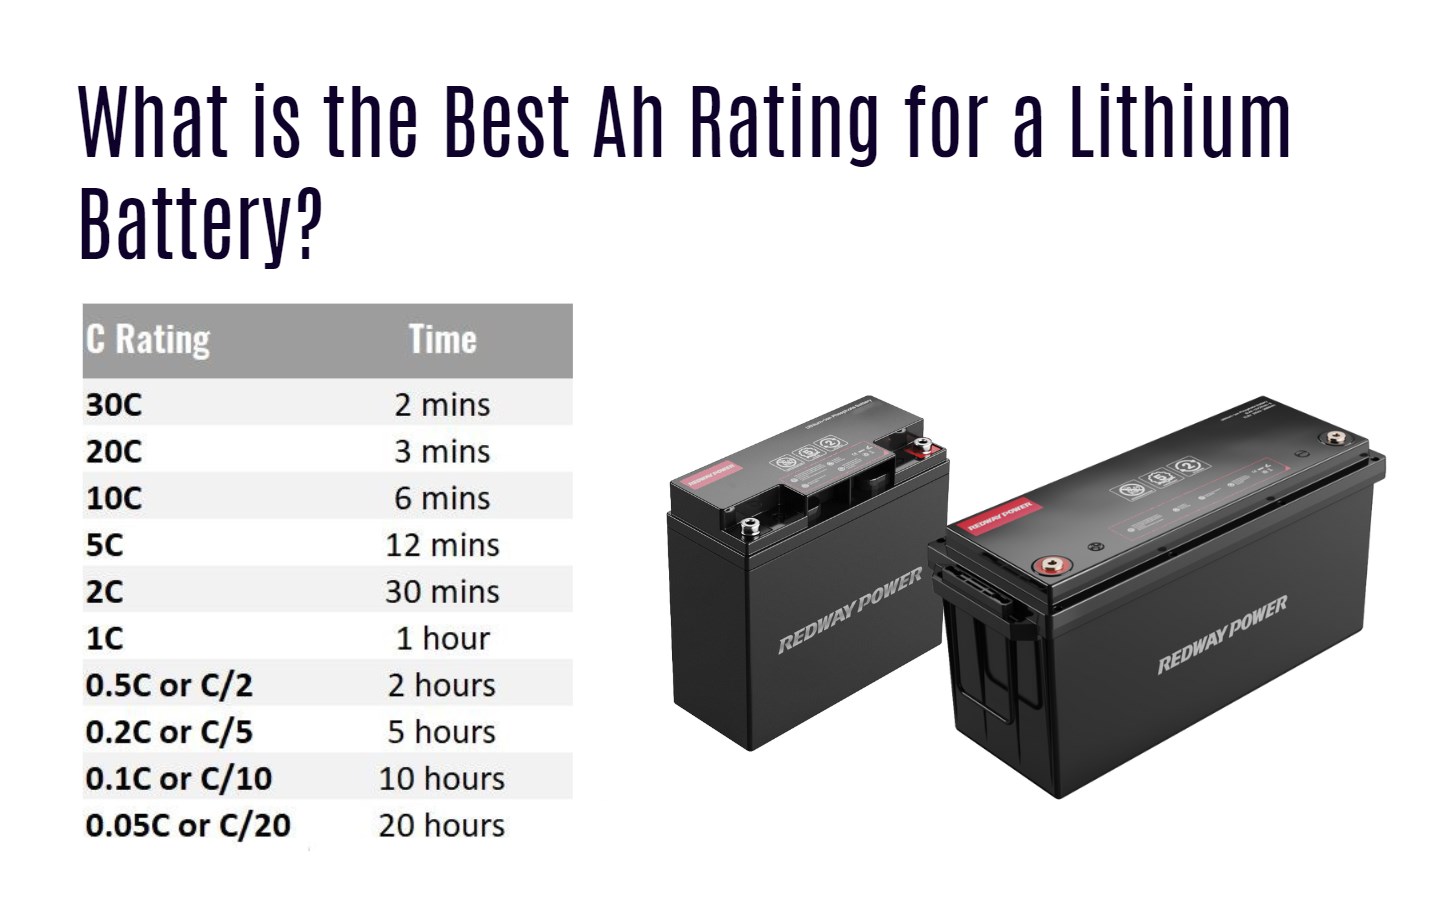 What is the Best Ah Rating for a Lithium Battery? 12v 200ah lifepo4 battery factory rv marine boat